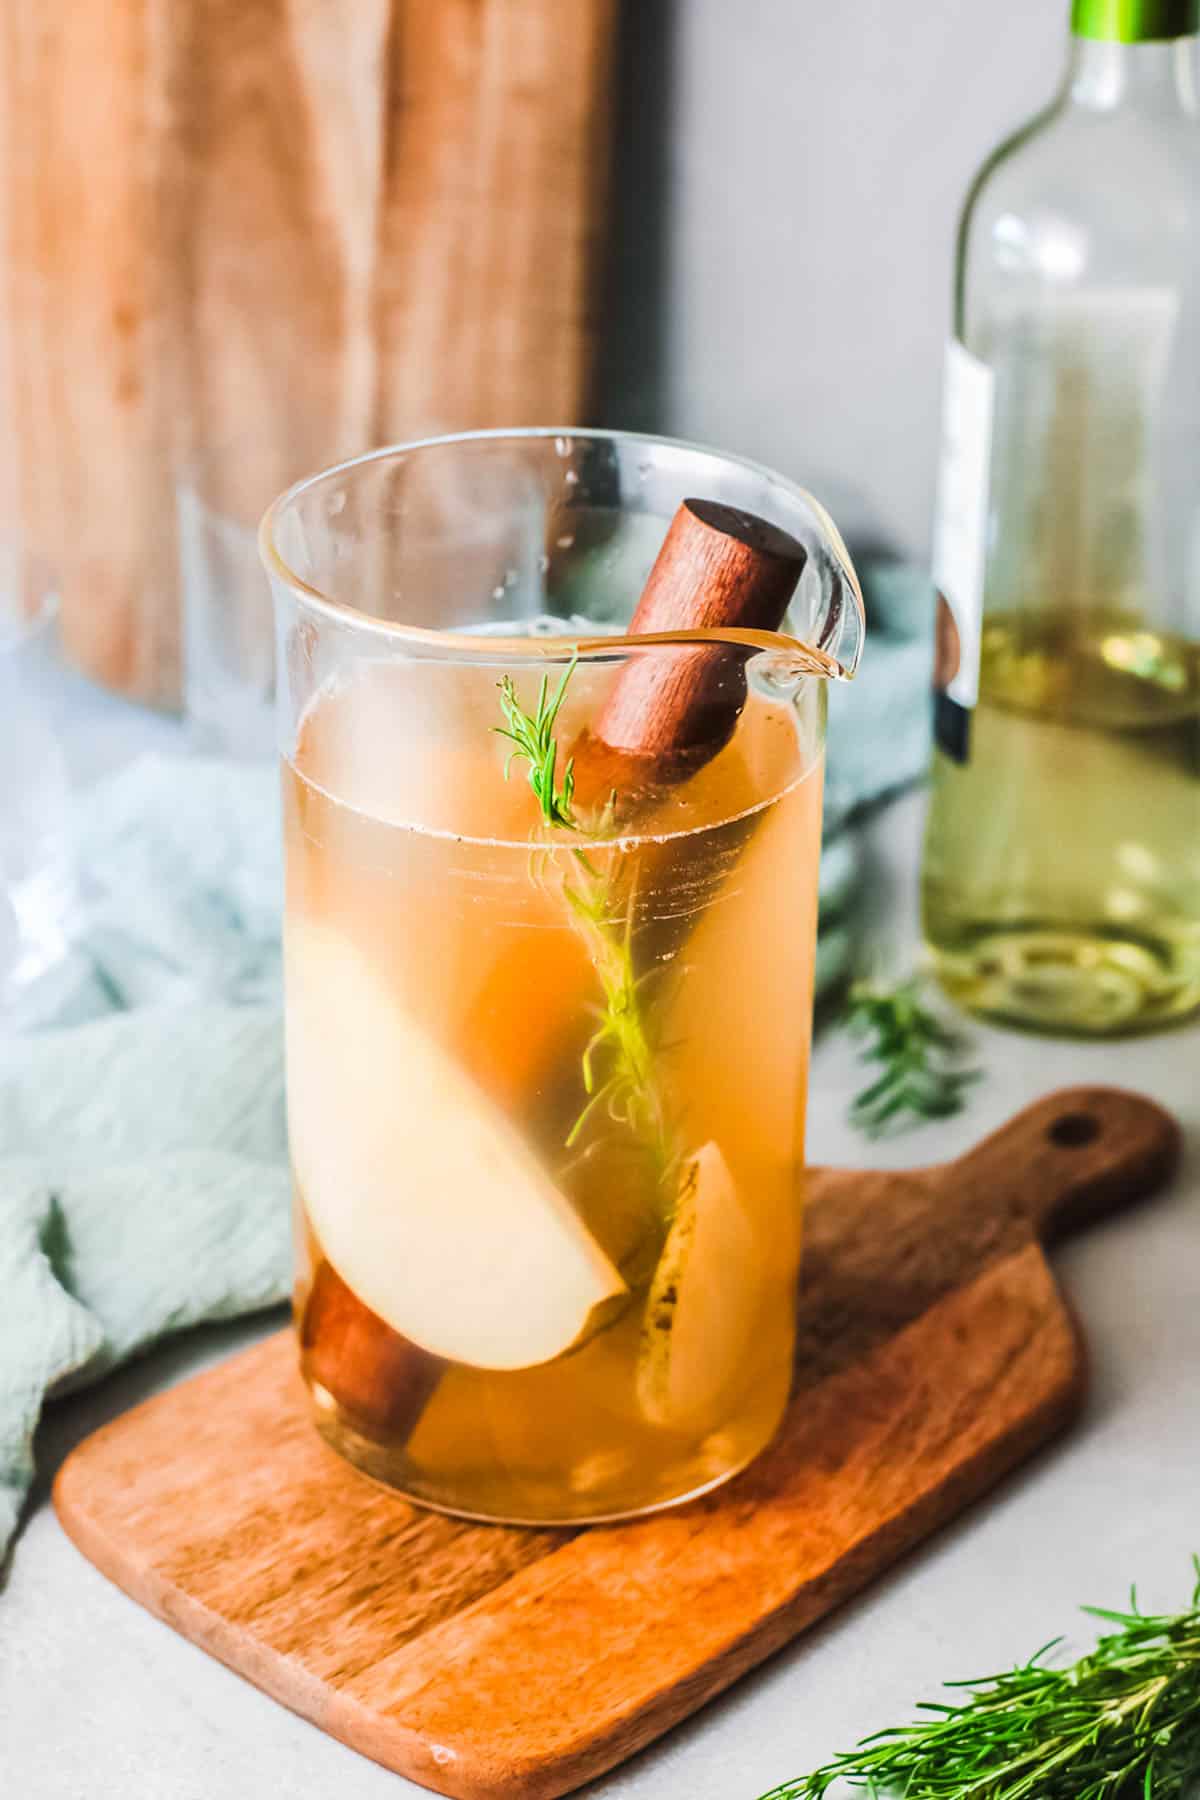 A glass pitcher with juices, wine, rosemary and sliced pears with a wooden muddler in it sitting on top of a wooden cutting board.